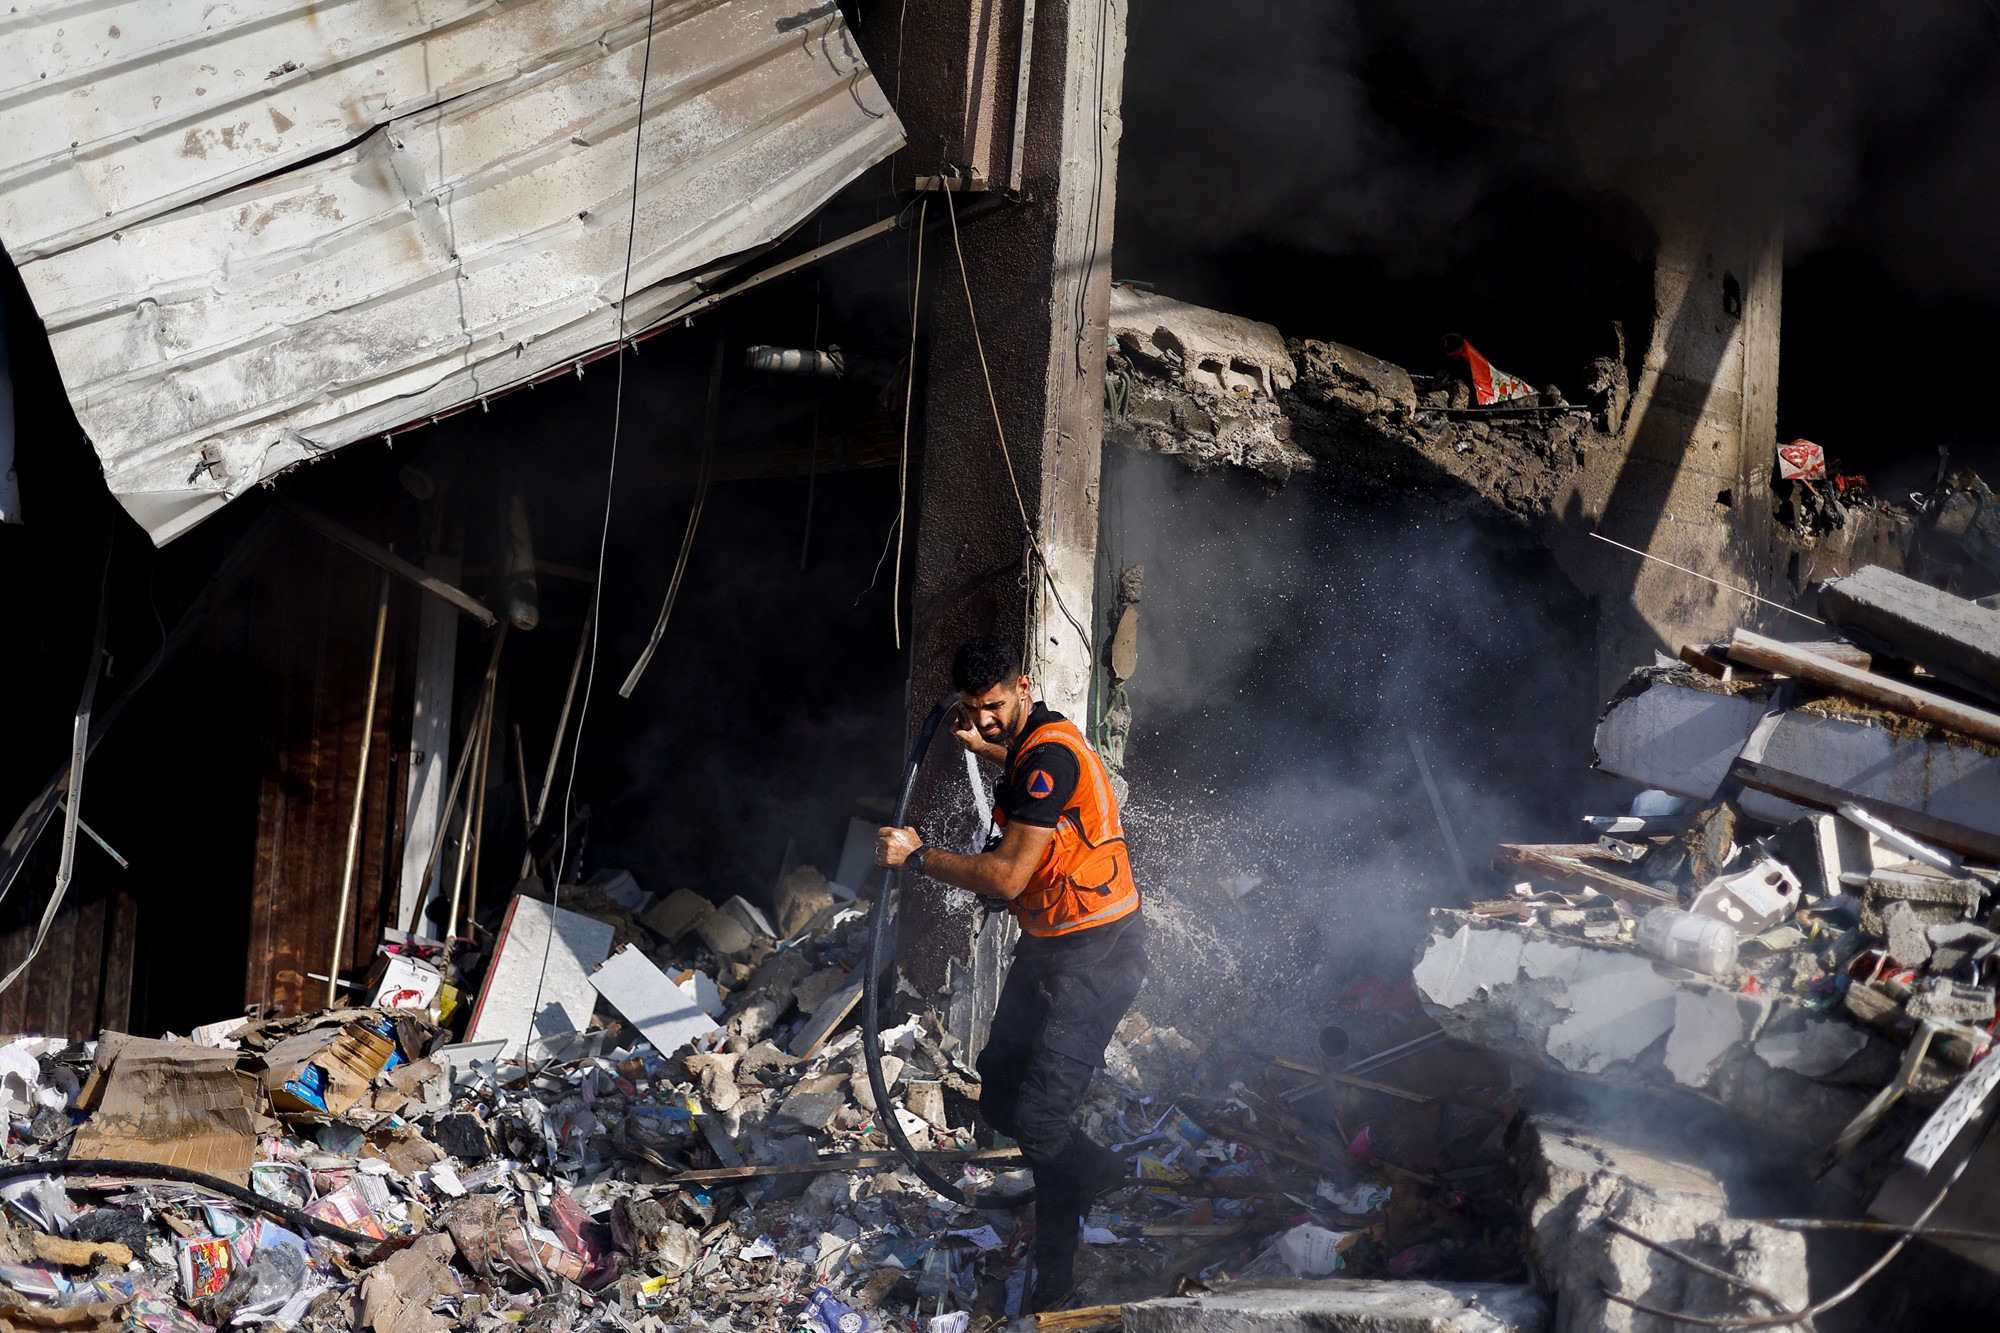 A Palestinian firefighter works to put out a fire at the site of Israeli strikes on a residential building